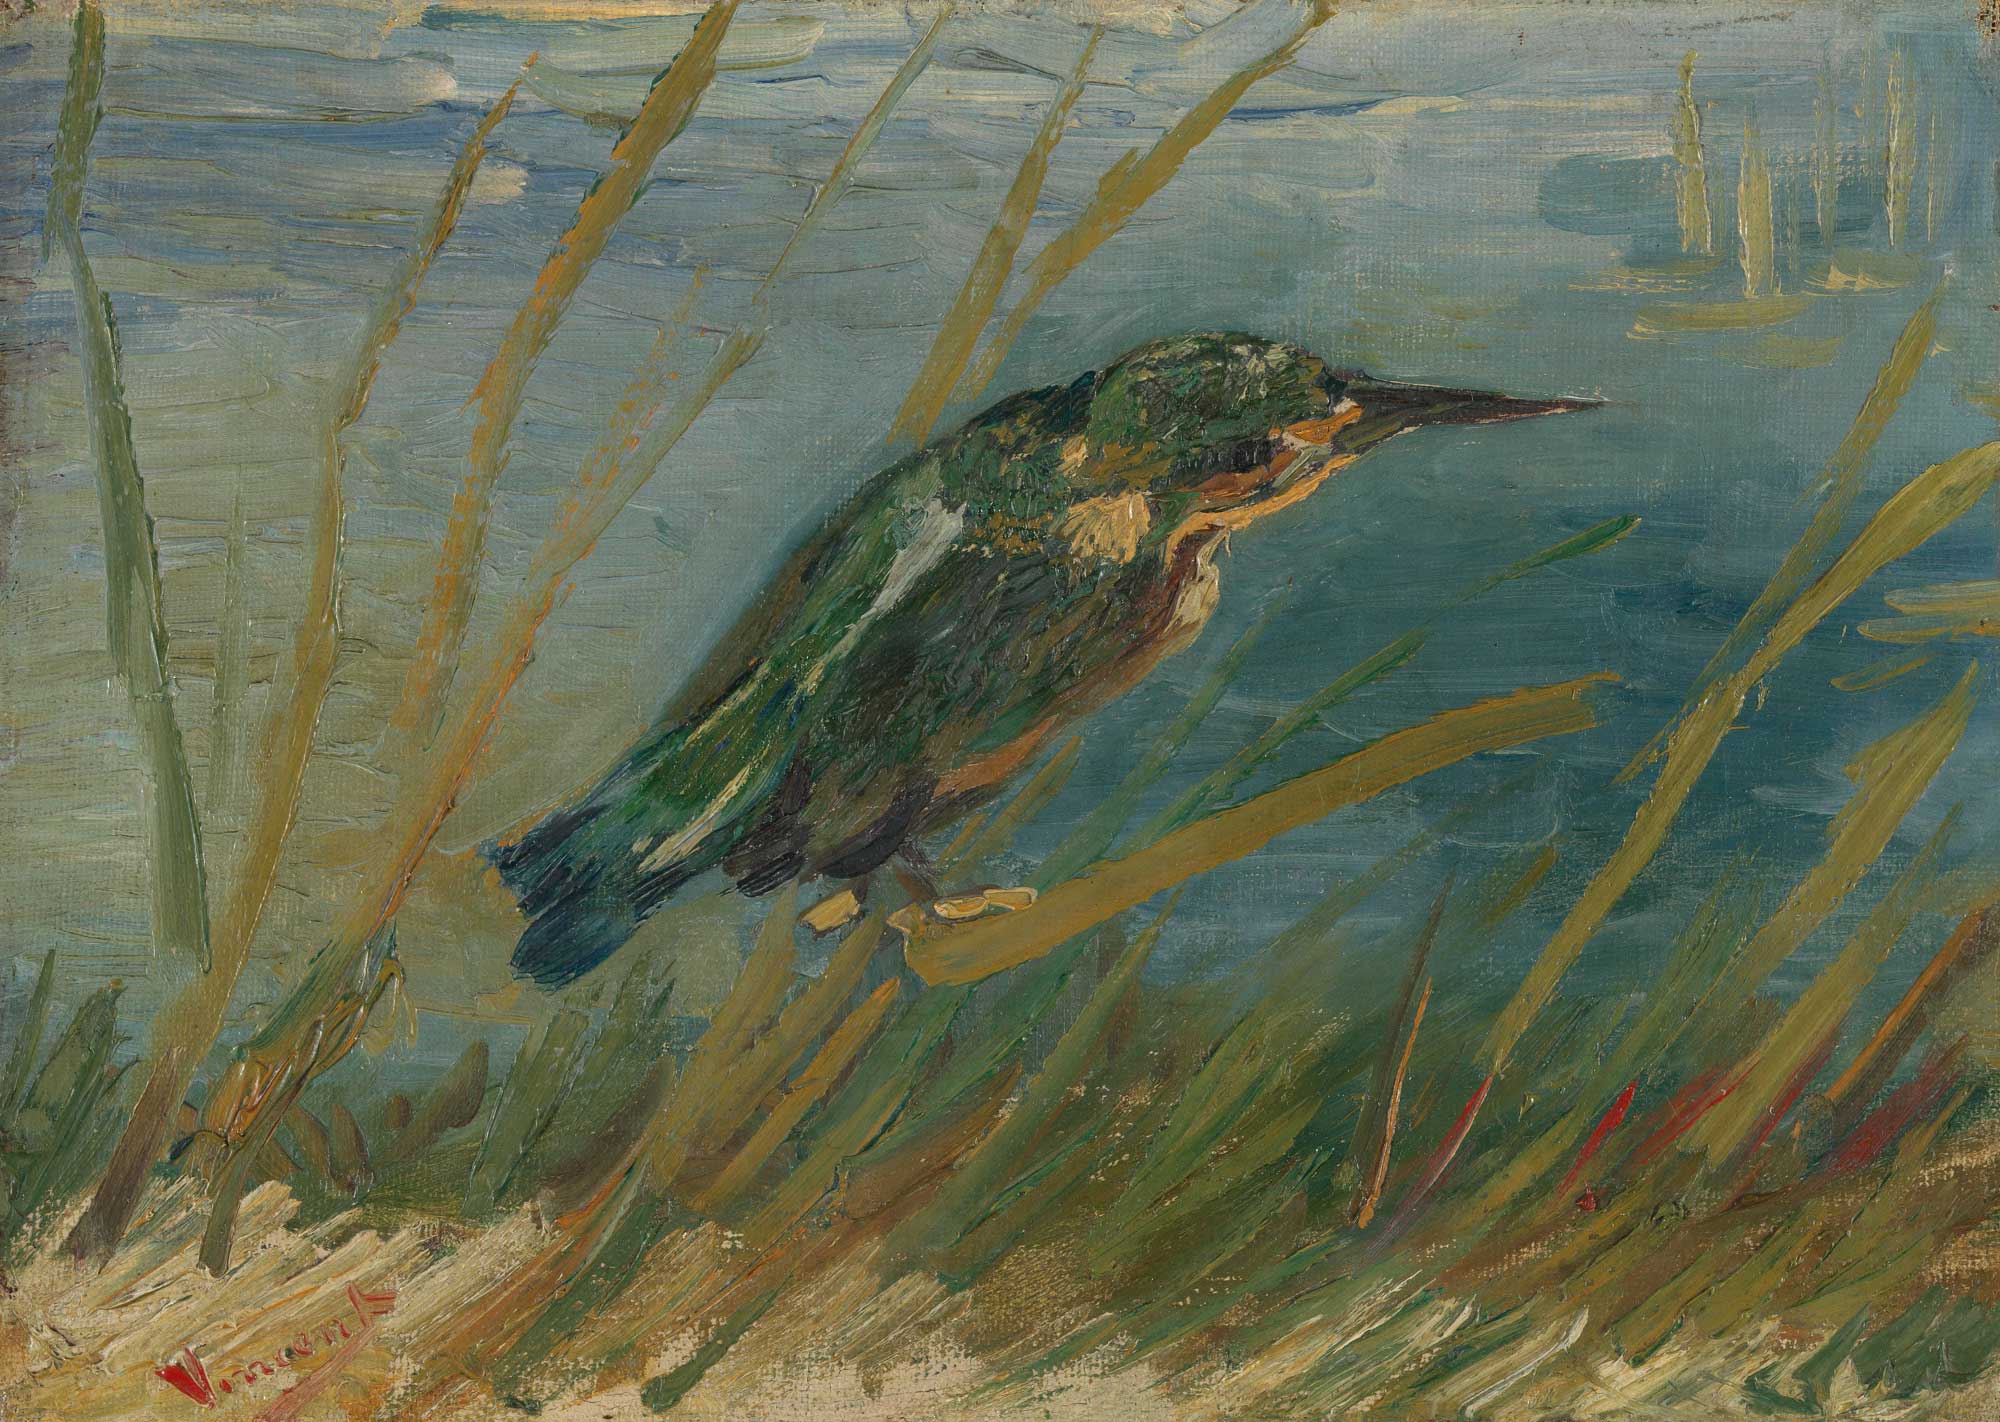 Color photograph of a painting of a river kingfisher by Vincent Van Gogh, painted in 1887. The photo shows an impressionistic painting of a kingfisher sitting in grasses or reeds.